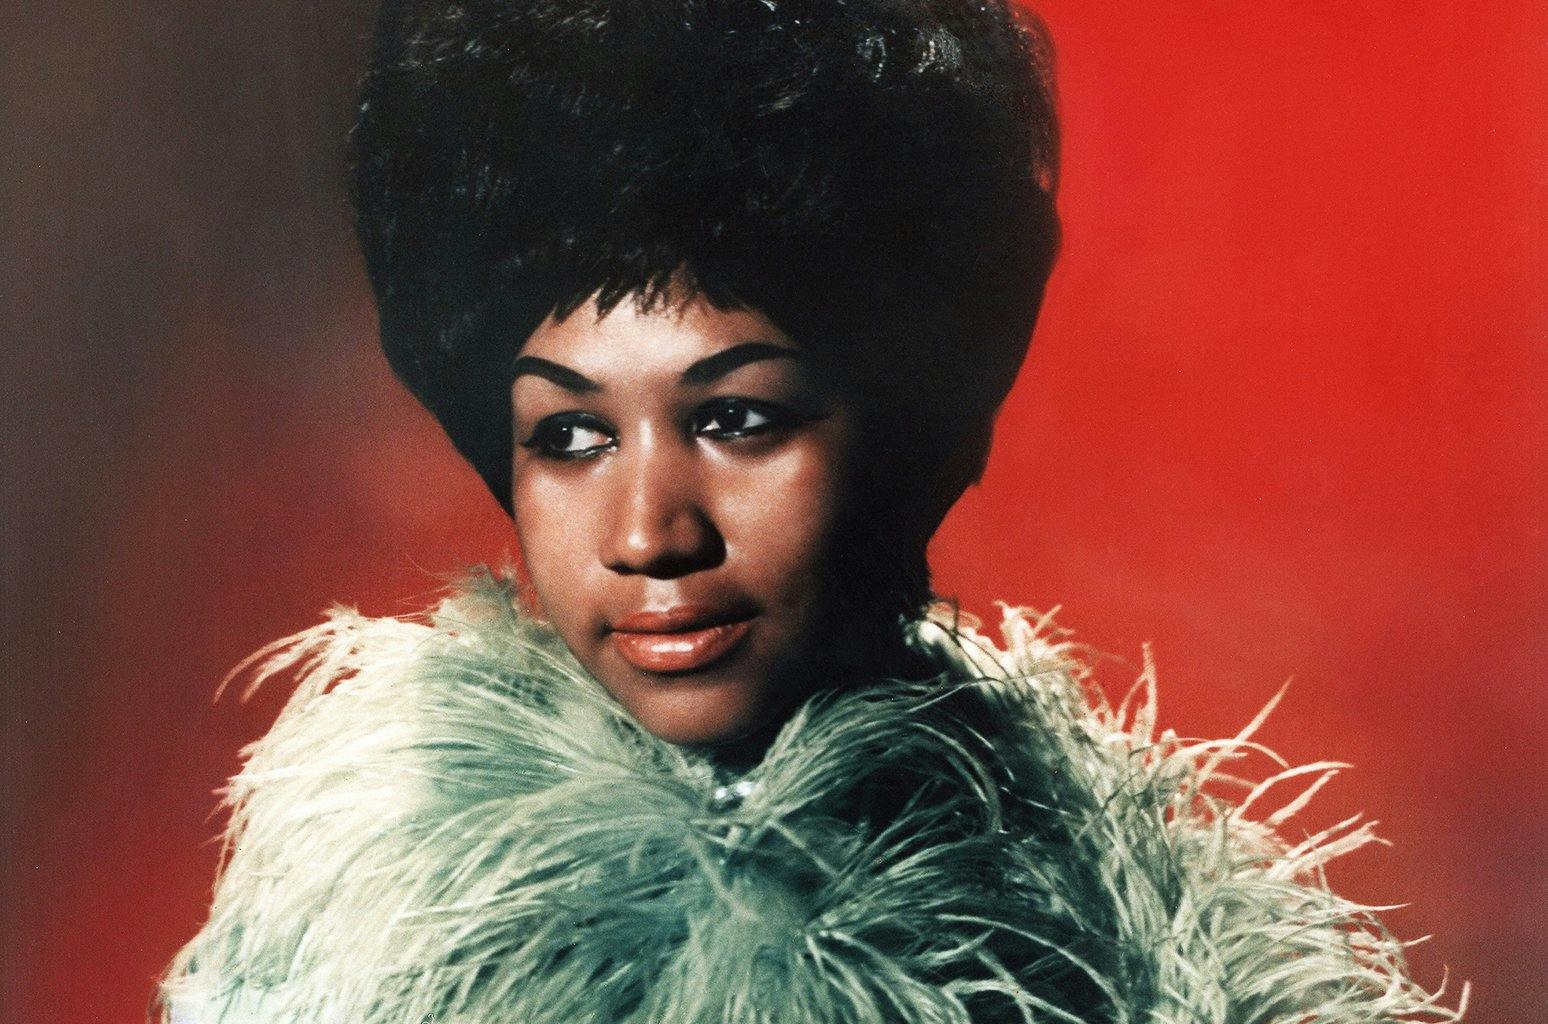 Remembering the life of music icon Aretha Franklin